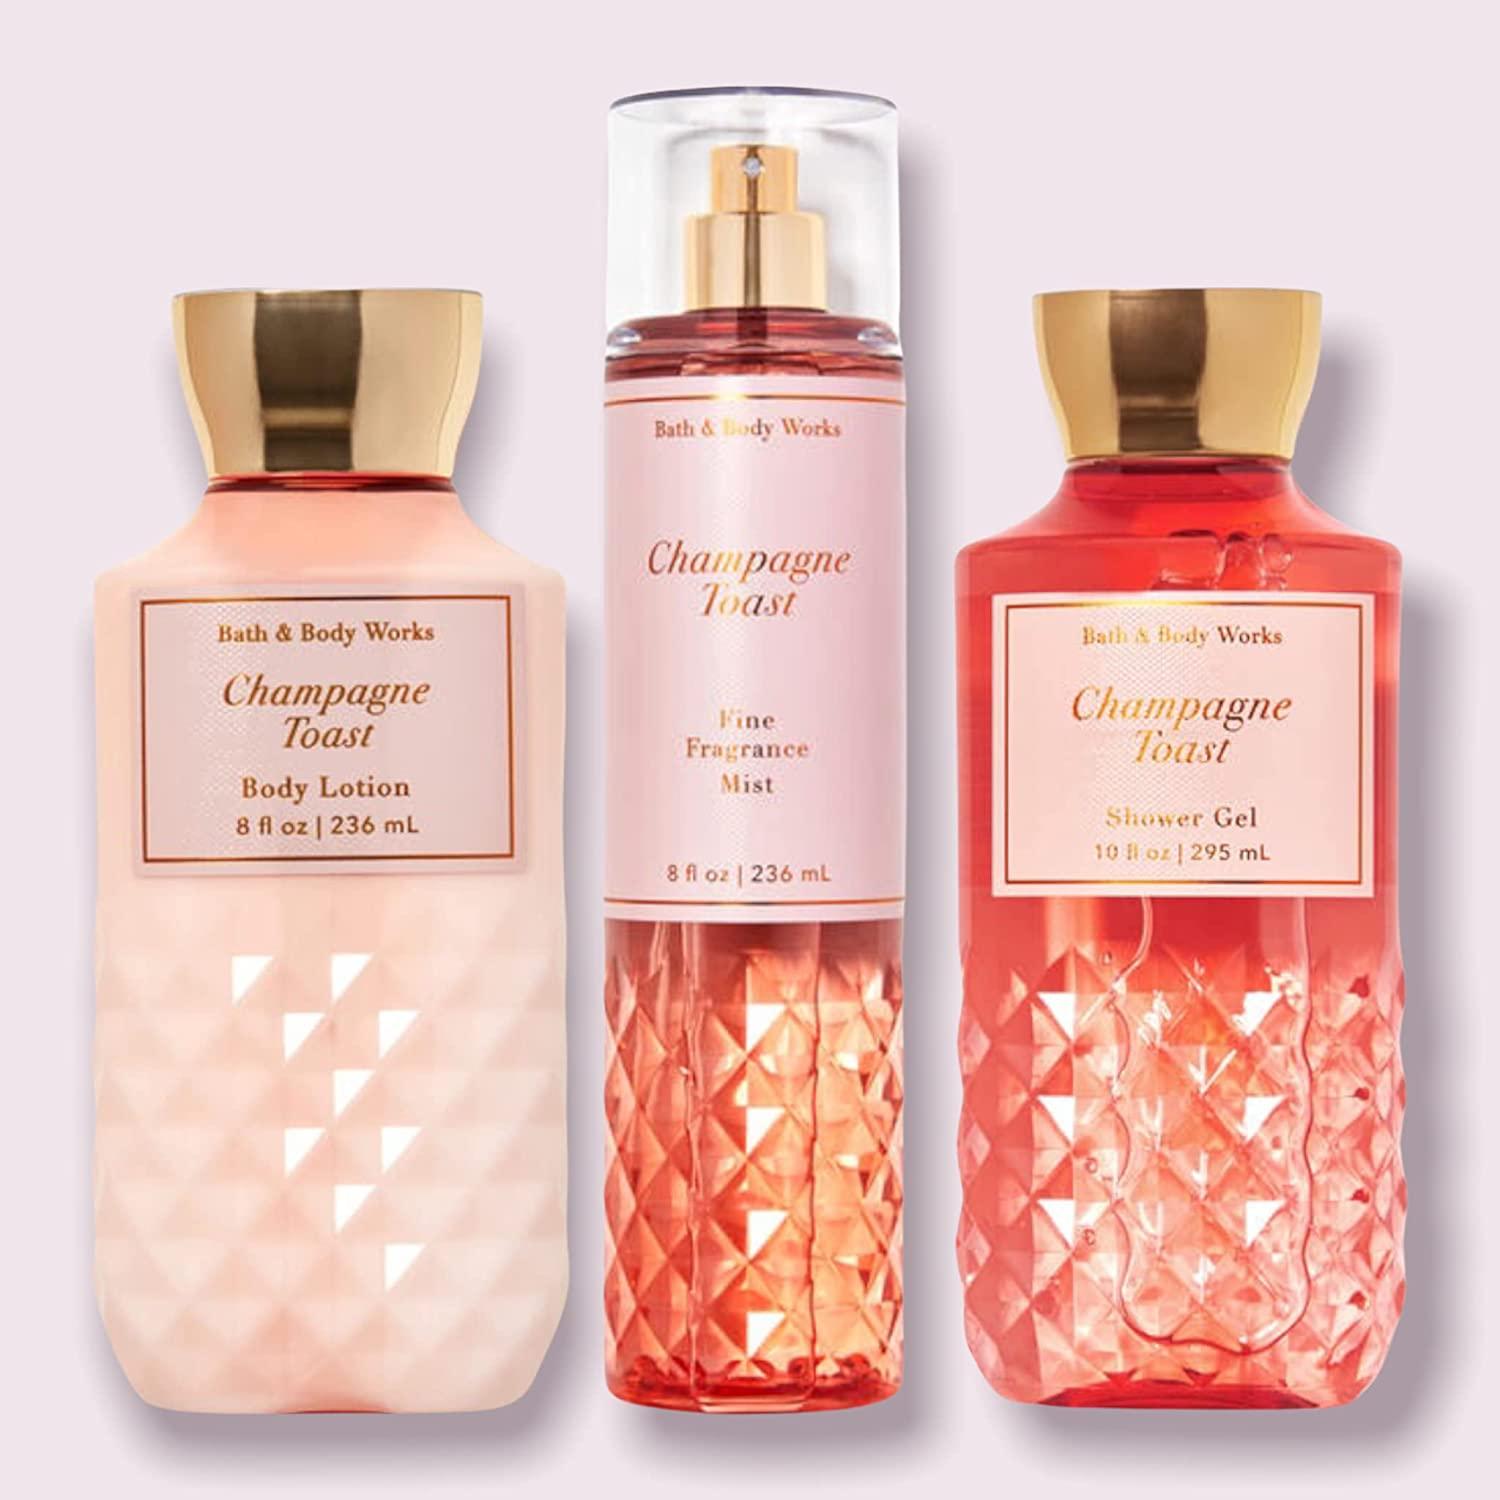 Bath and Body Works - Champagne Toast - Daily Trio - Shower Gel